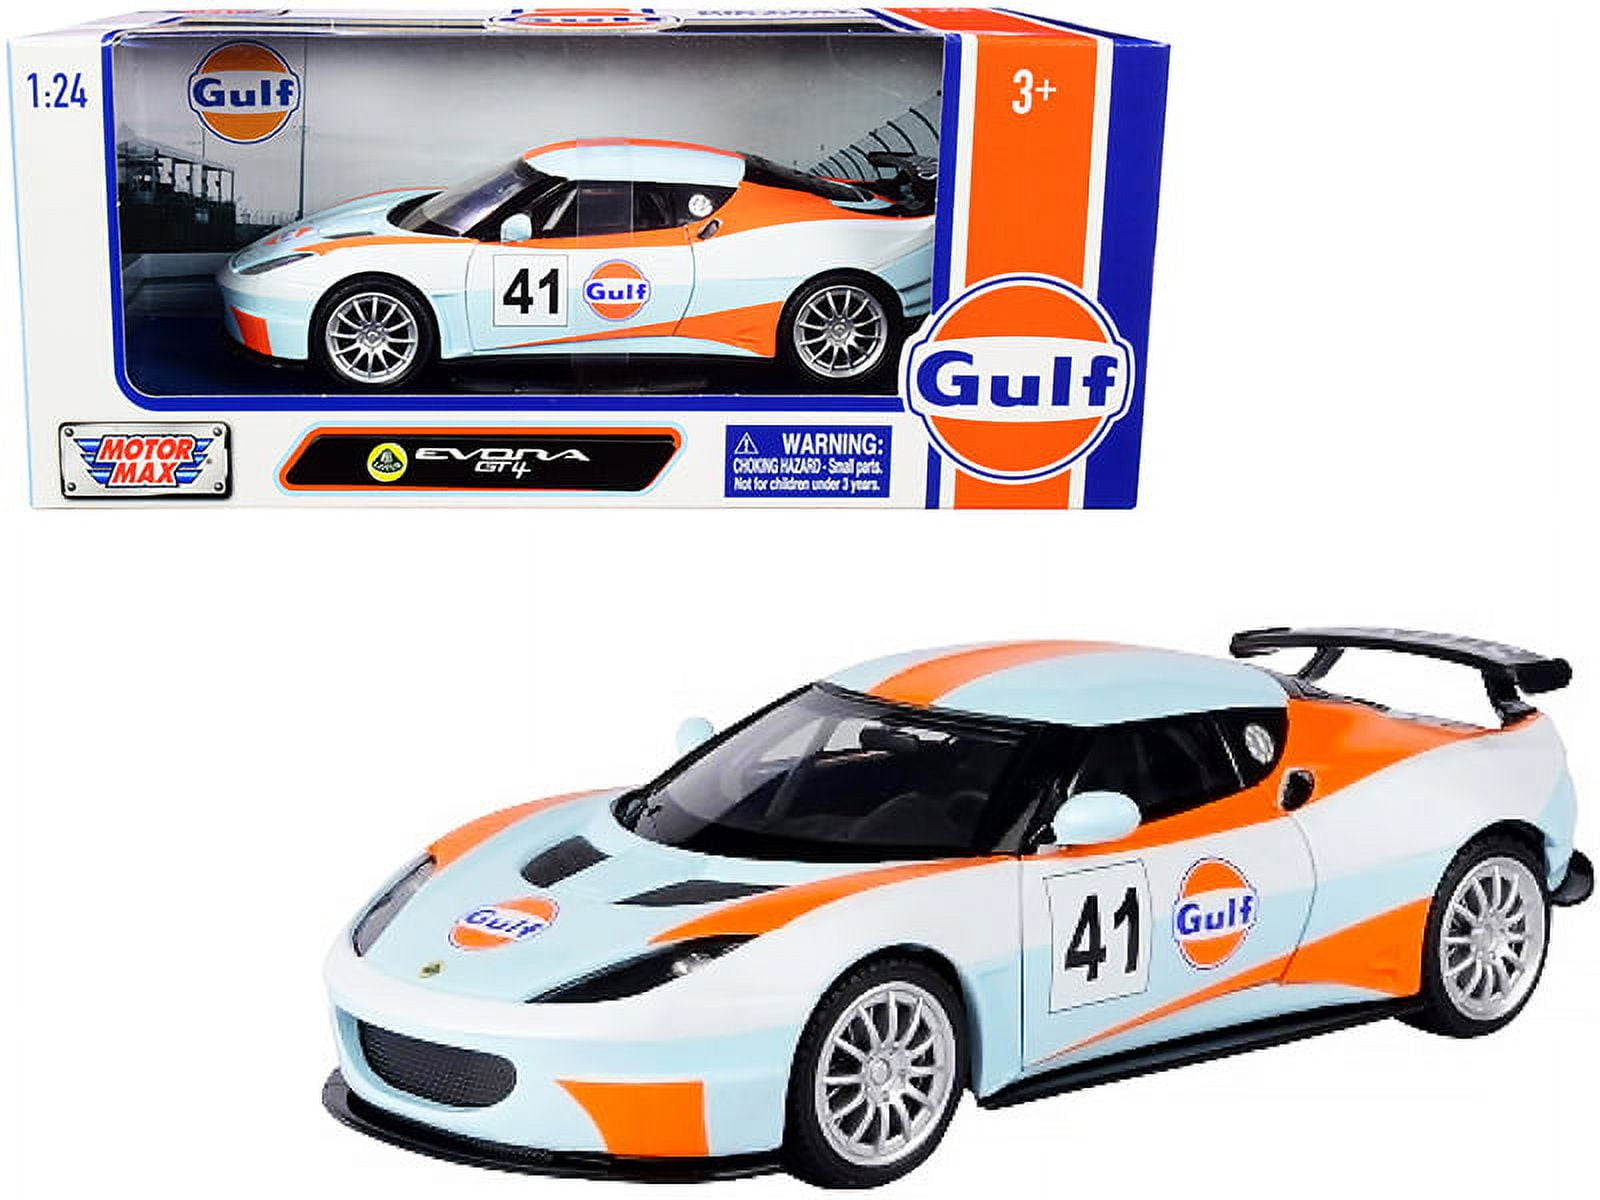 Picture of Motormax 79660 1-24 Diecast Model Car for Lotus Evora GT4 No. 41 Gulf Oil Light Blue with White & Orange Stripes